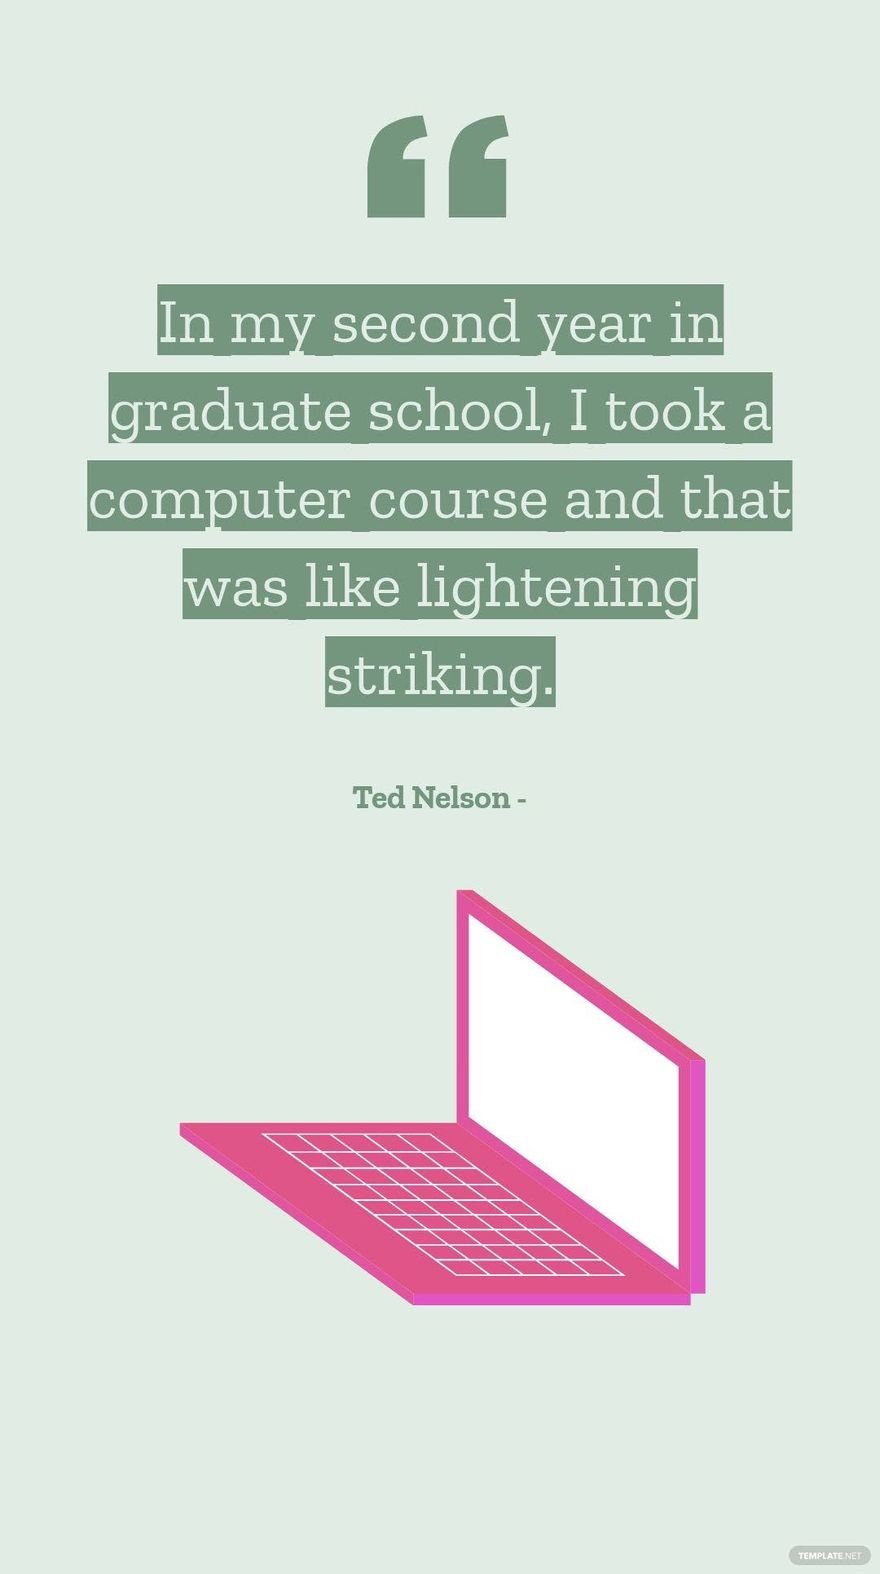 Ted Nelson - In my second year in graduate school, I took a computer course and that was like lightening striking.